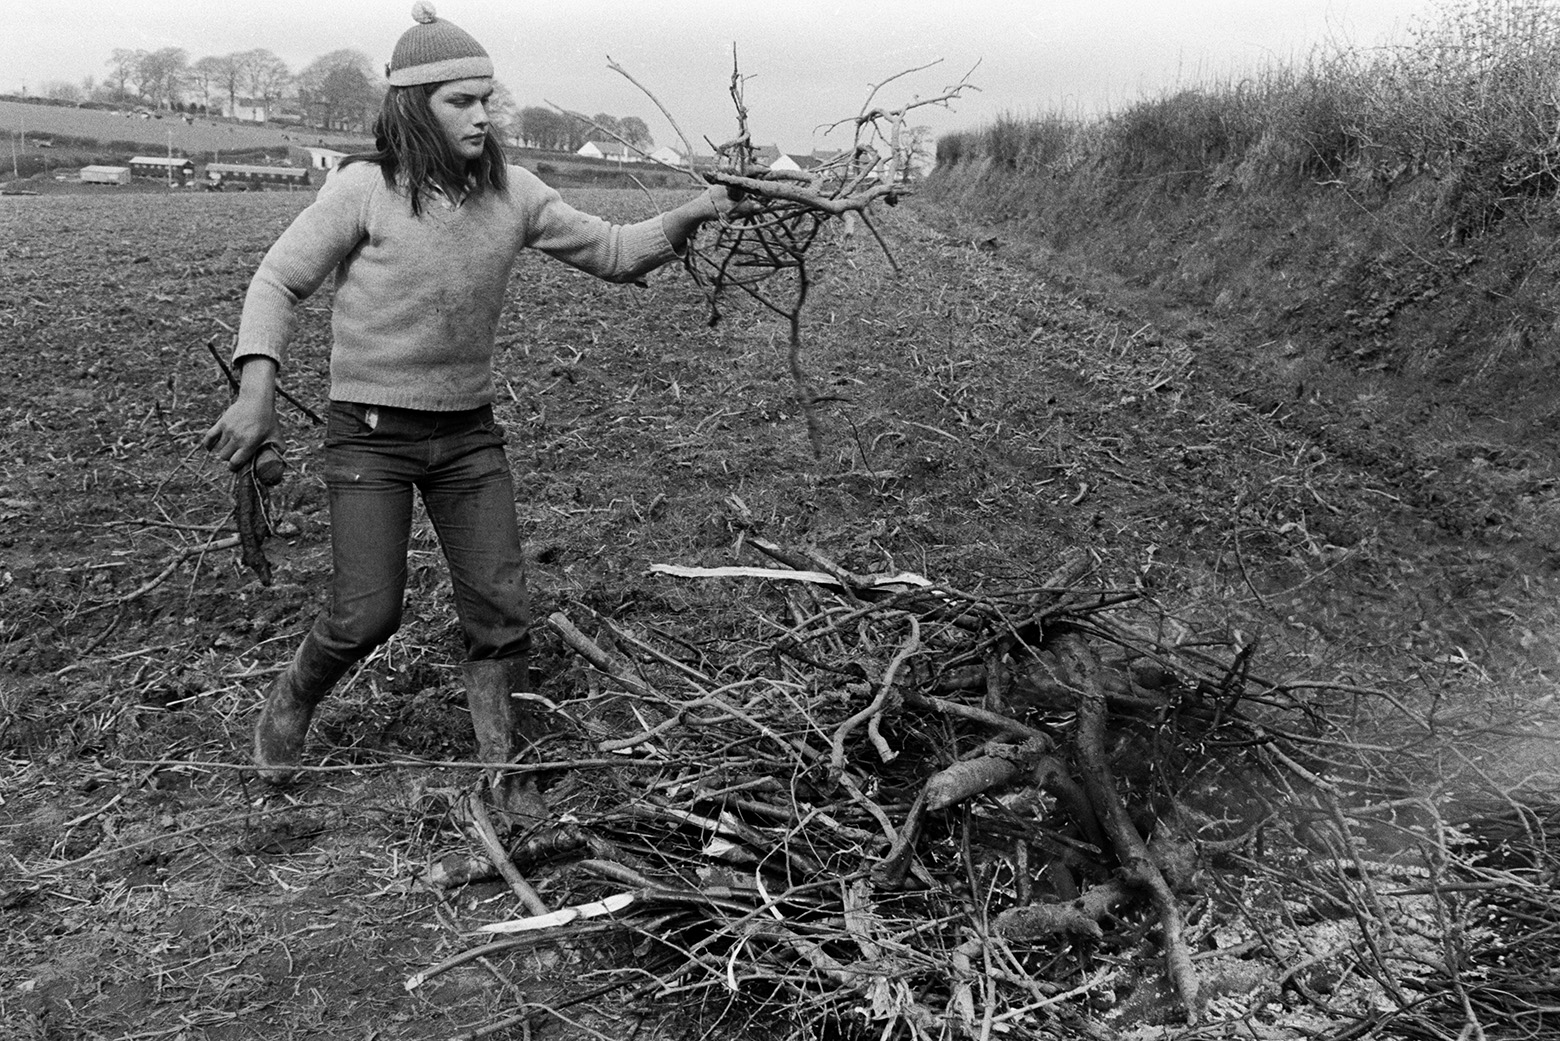 Derek Bright clearing sticks and twigs from a field at Mill Road Farm, Beaford, to make it ready to plant corn. He is building a small bonfire with the sticks. The farm was also known as Jeffrys.